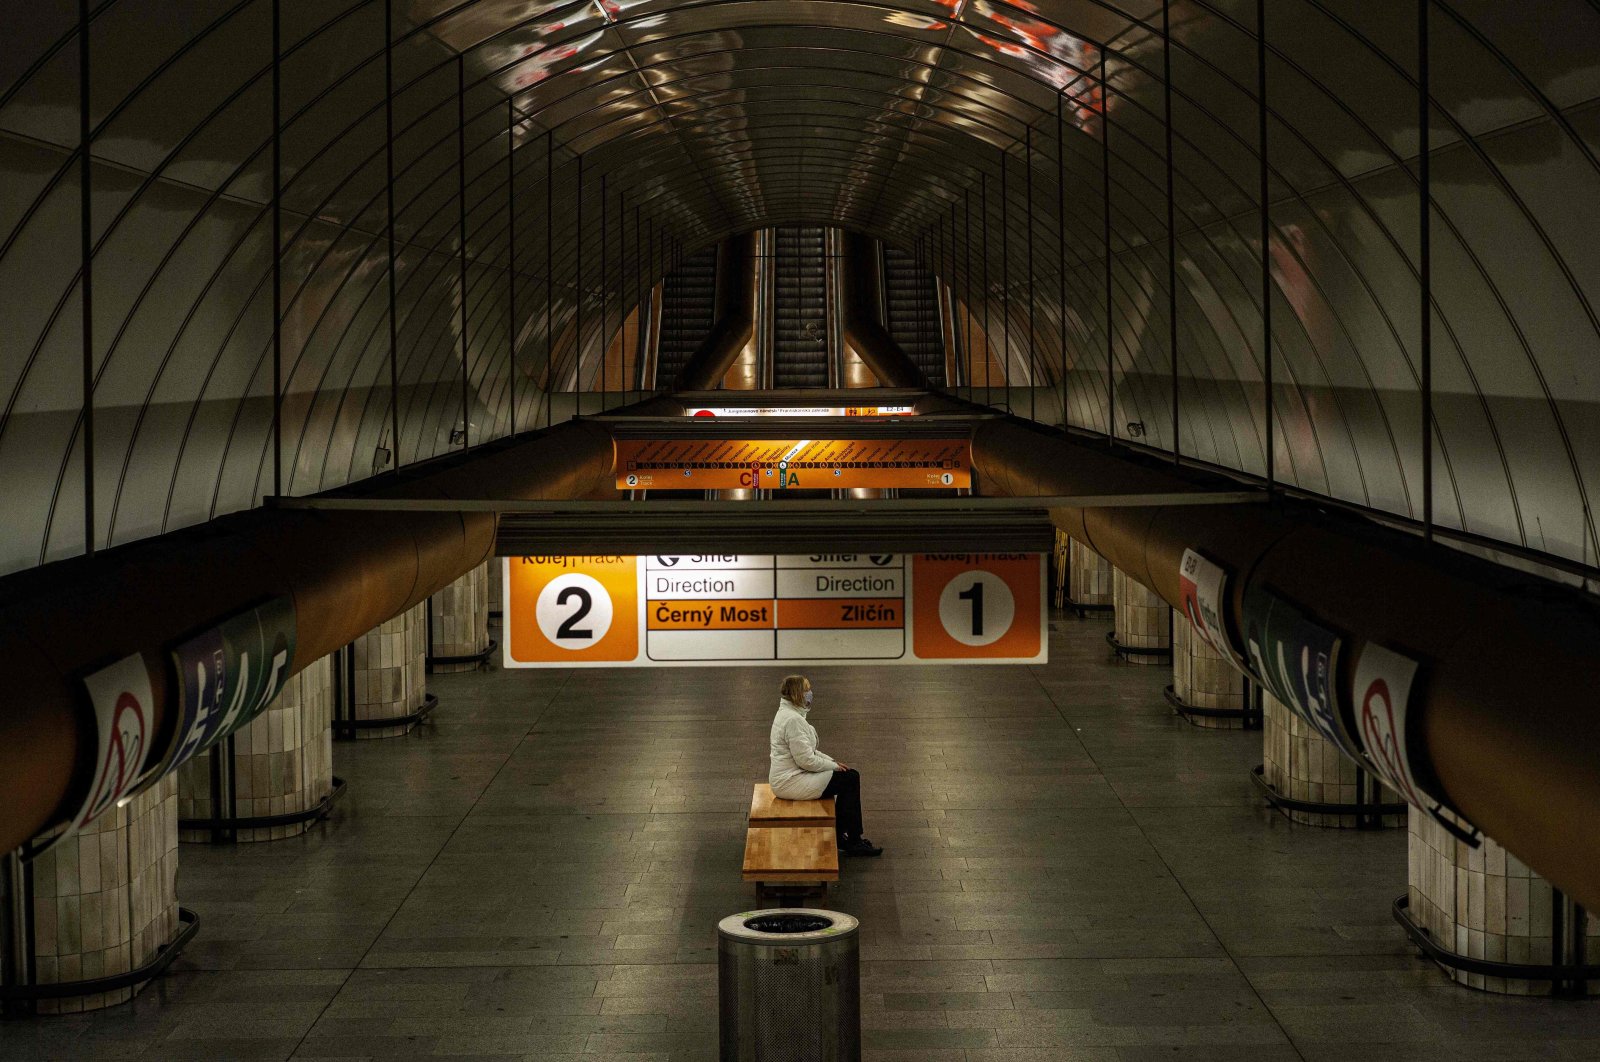 A woman wearing a face mask sits on a bench at an empty metro station in Prague, Czechia, amid restrictions due to the coronavirus pandemic, April 15, 2020. (AFP Photo)